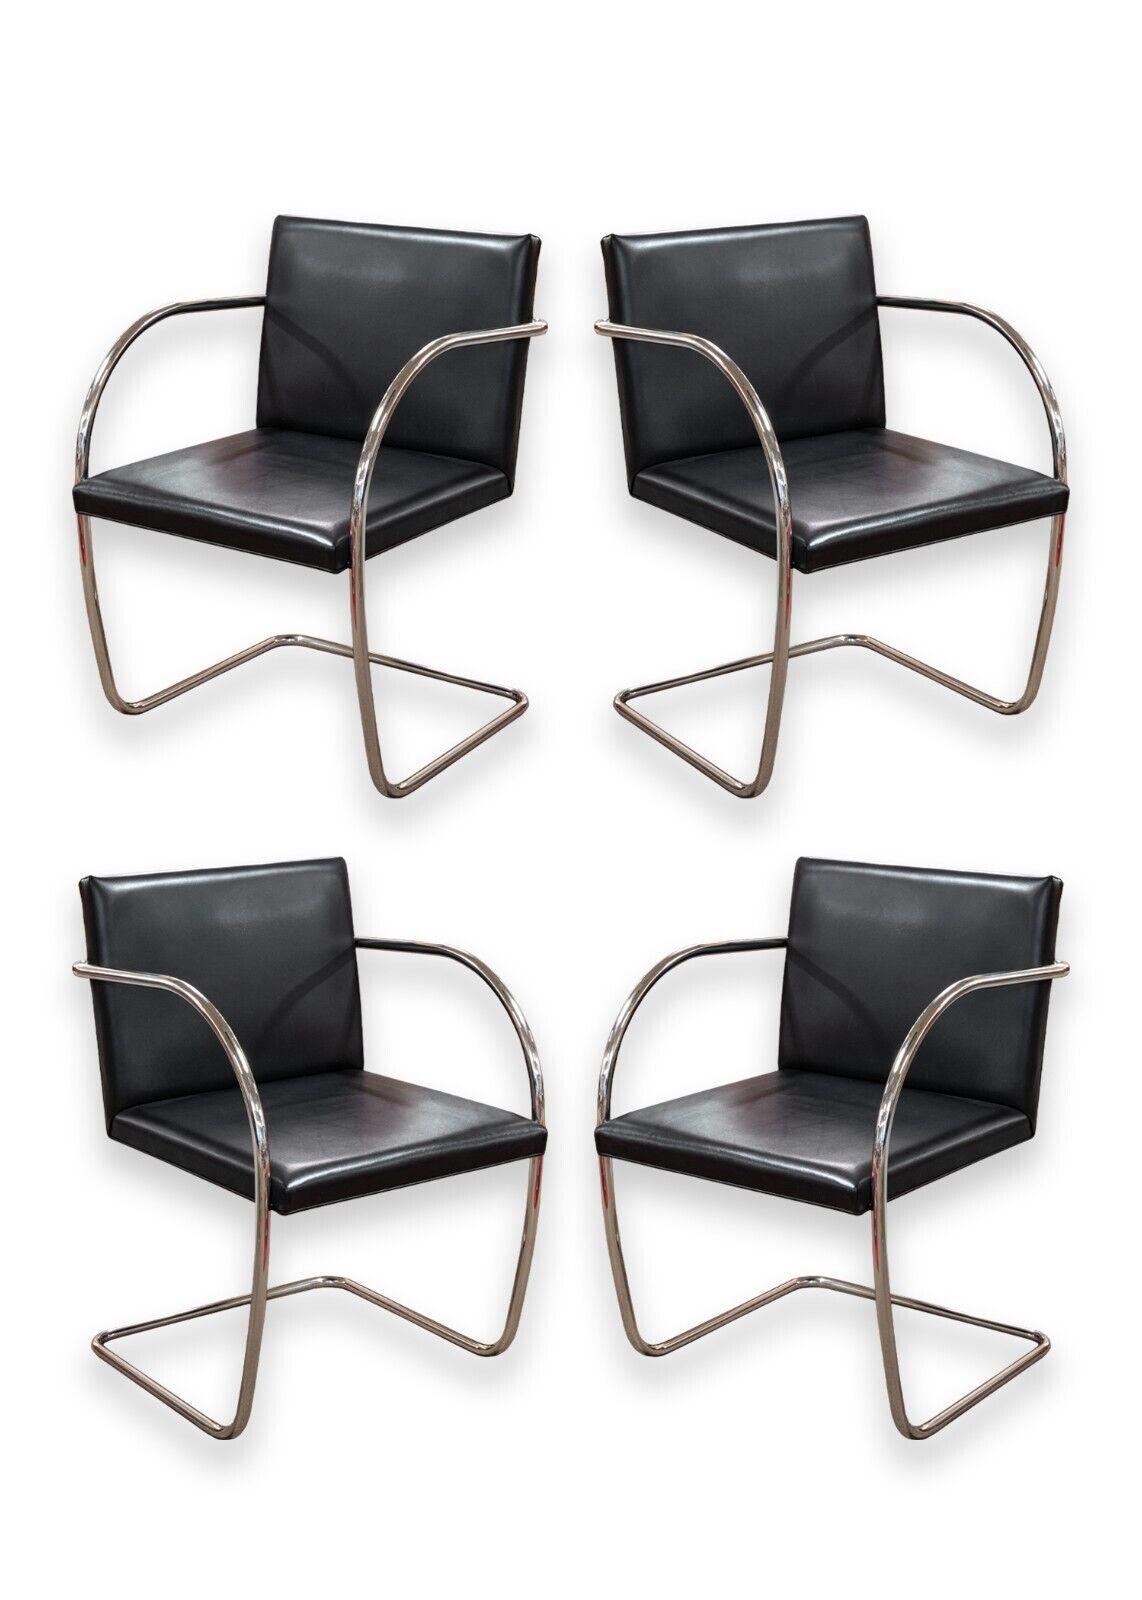 A set of 4 black leather tubular Brno chairs. A beautiful, classic set of chairs from legendary designer Mies van der Rohe for Knoll. These iconic chairs feature a simple rectangular black leather seat and back, and a tubular chrome cantilever